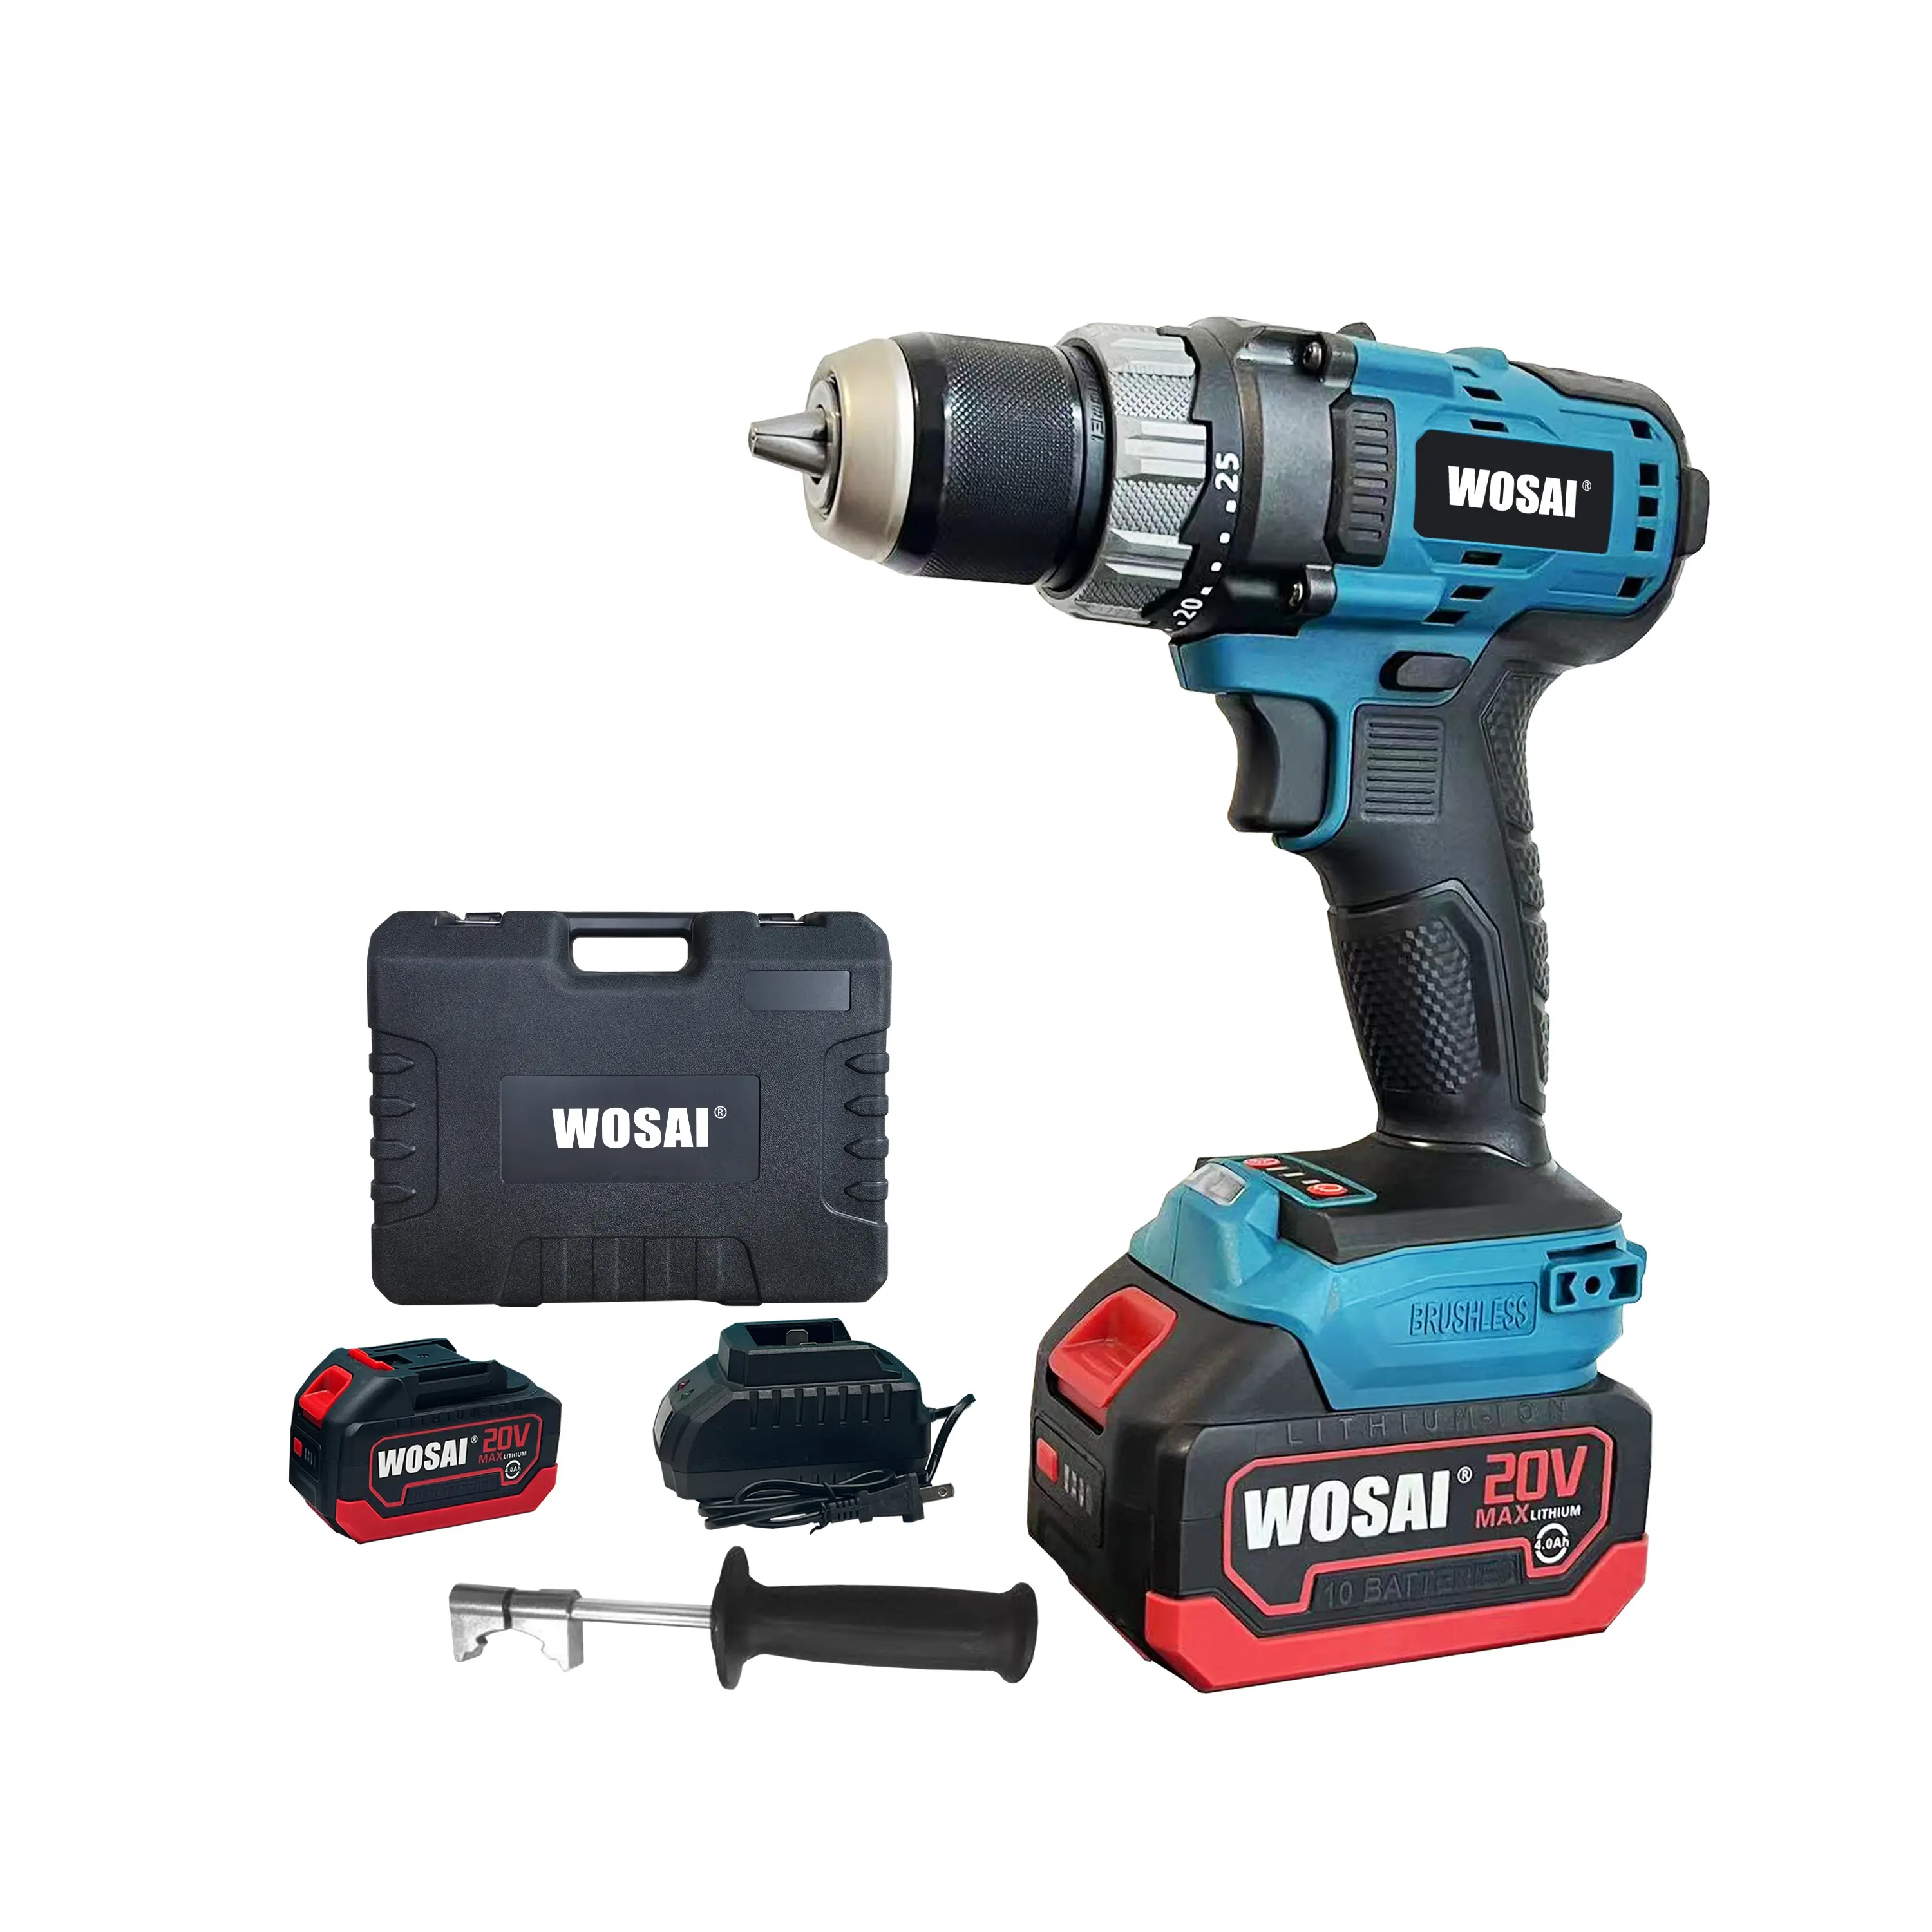 WOSAI China Supplier Powerful 2.0ah Battery Cordless For Makita Electric Drill Power Hand Impact Drill Driver Drilling Machine